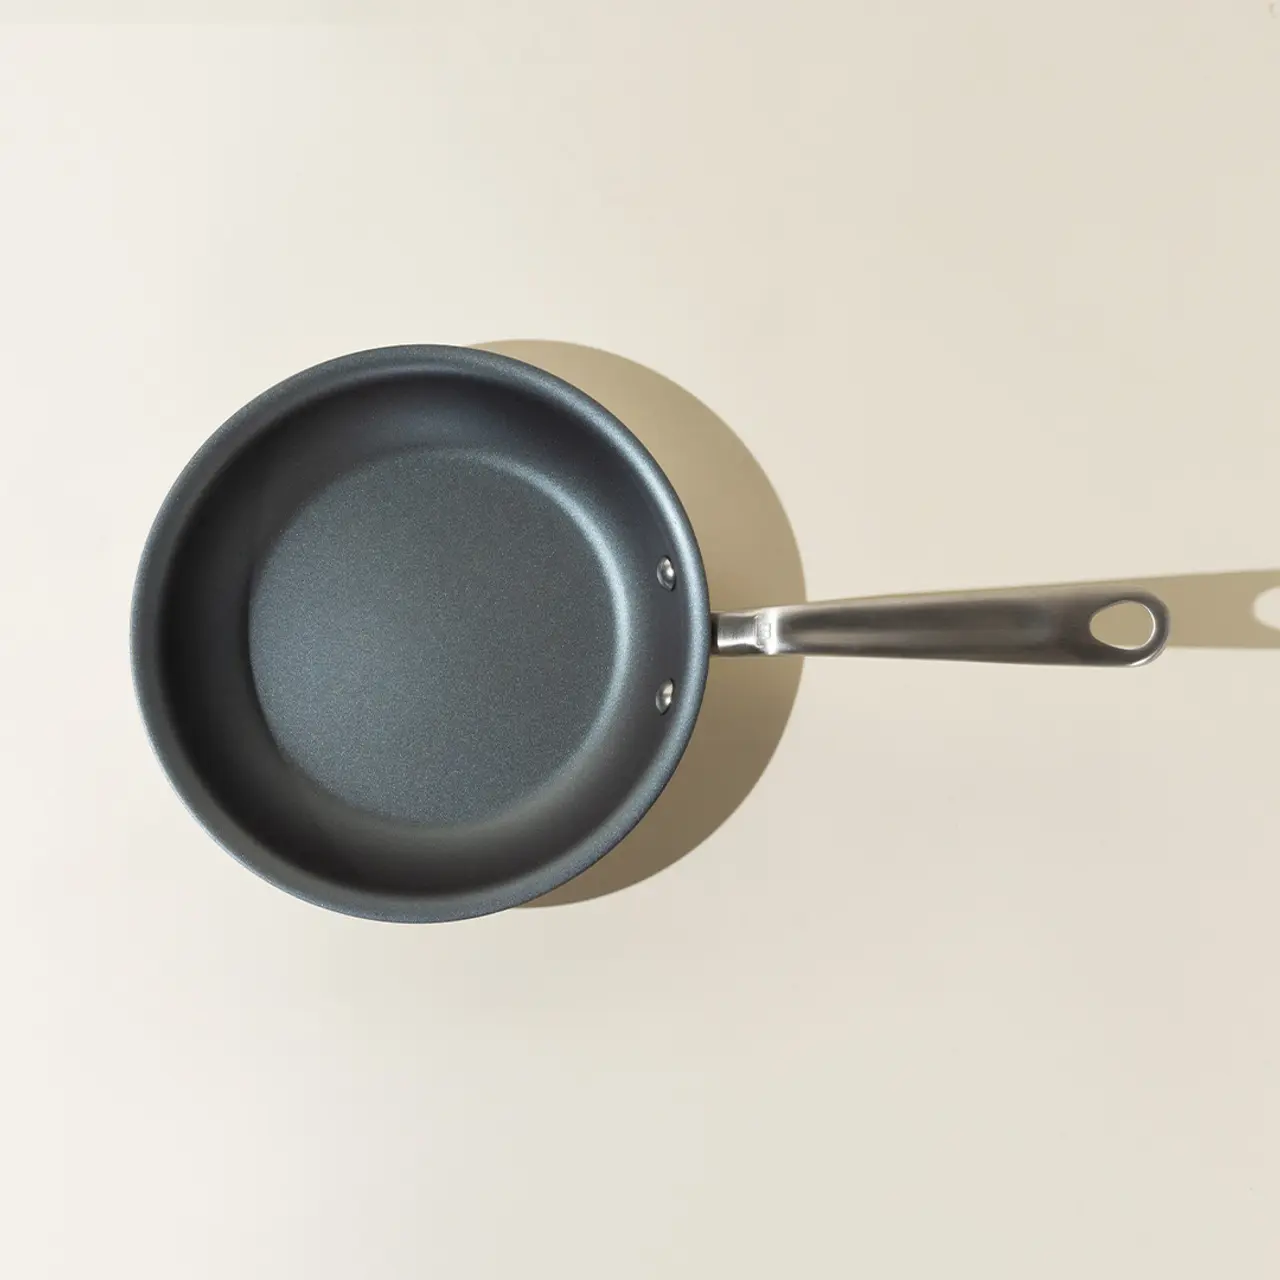 A non-stick frying pan with a metal handle is seen from above on a light background.